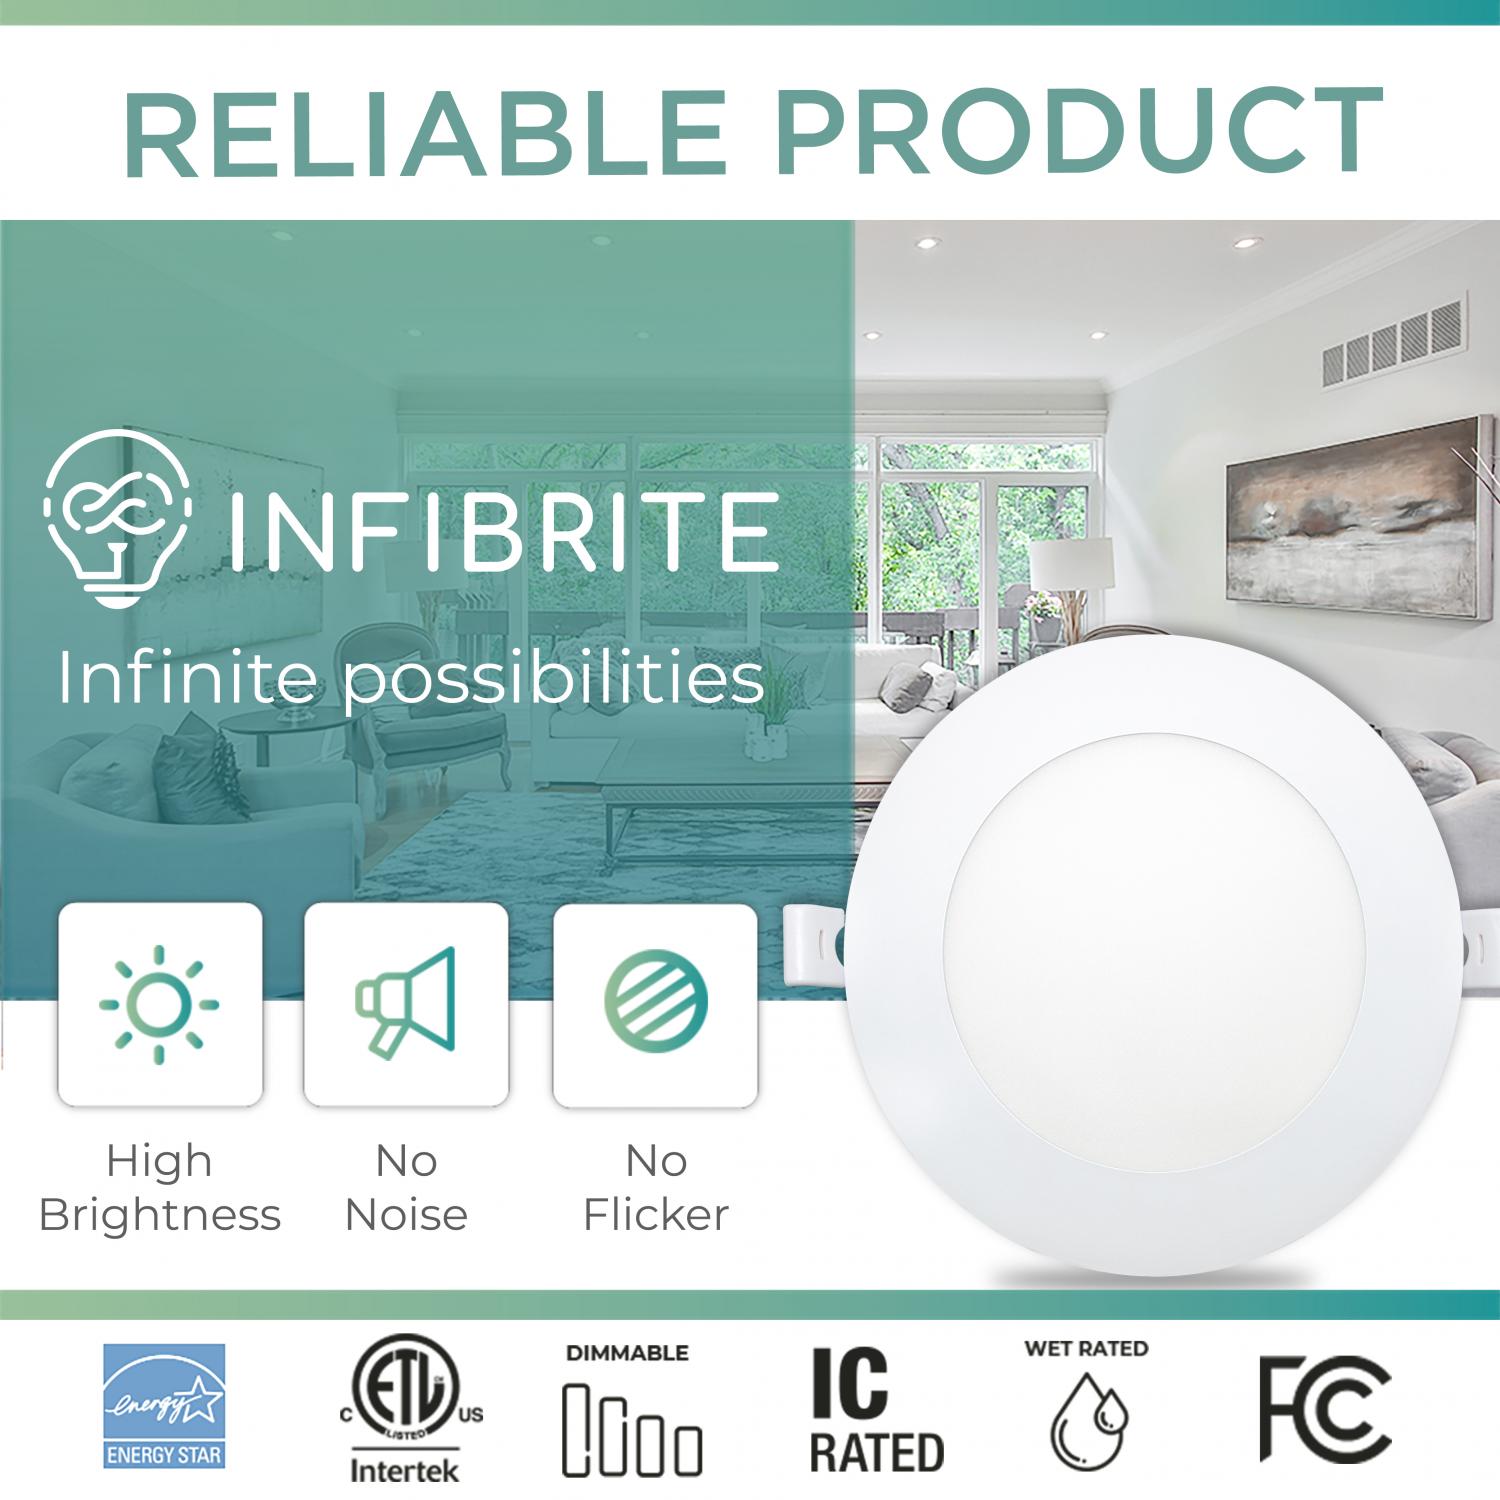 Infibrite 6 Inch 5000K Daylight 12W 1050LM Ultra-Slim LED Ceiling Light with Junction Box, Flush Mount, Dimmable, Fixture for Bedroom, Wet Rated for Bathroom, Easy Install, 110W Eqv, ETL & Energy Star, US Company (24 Pack)